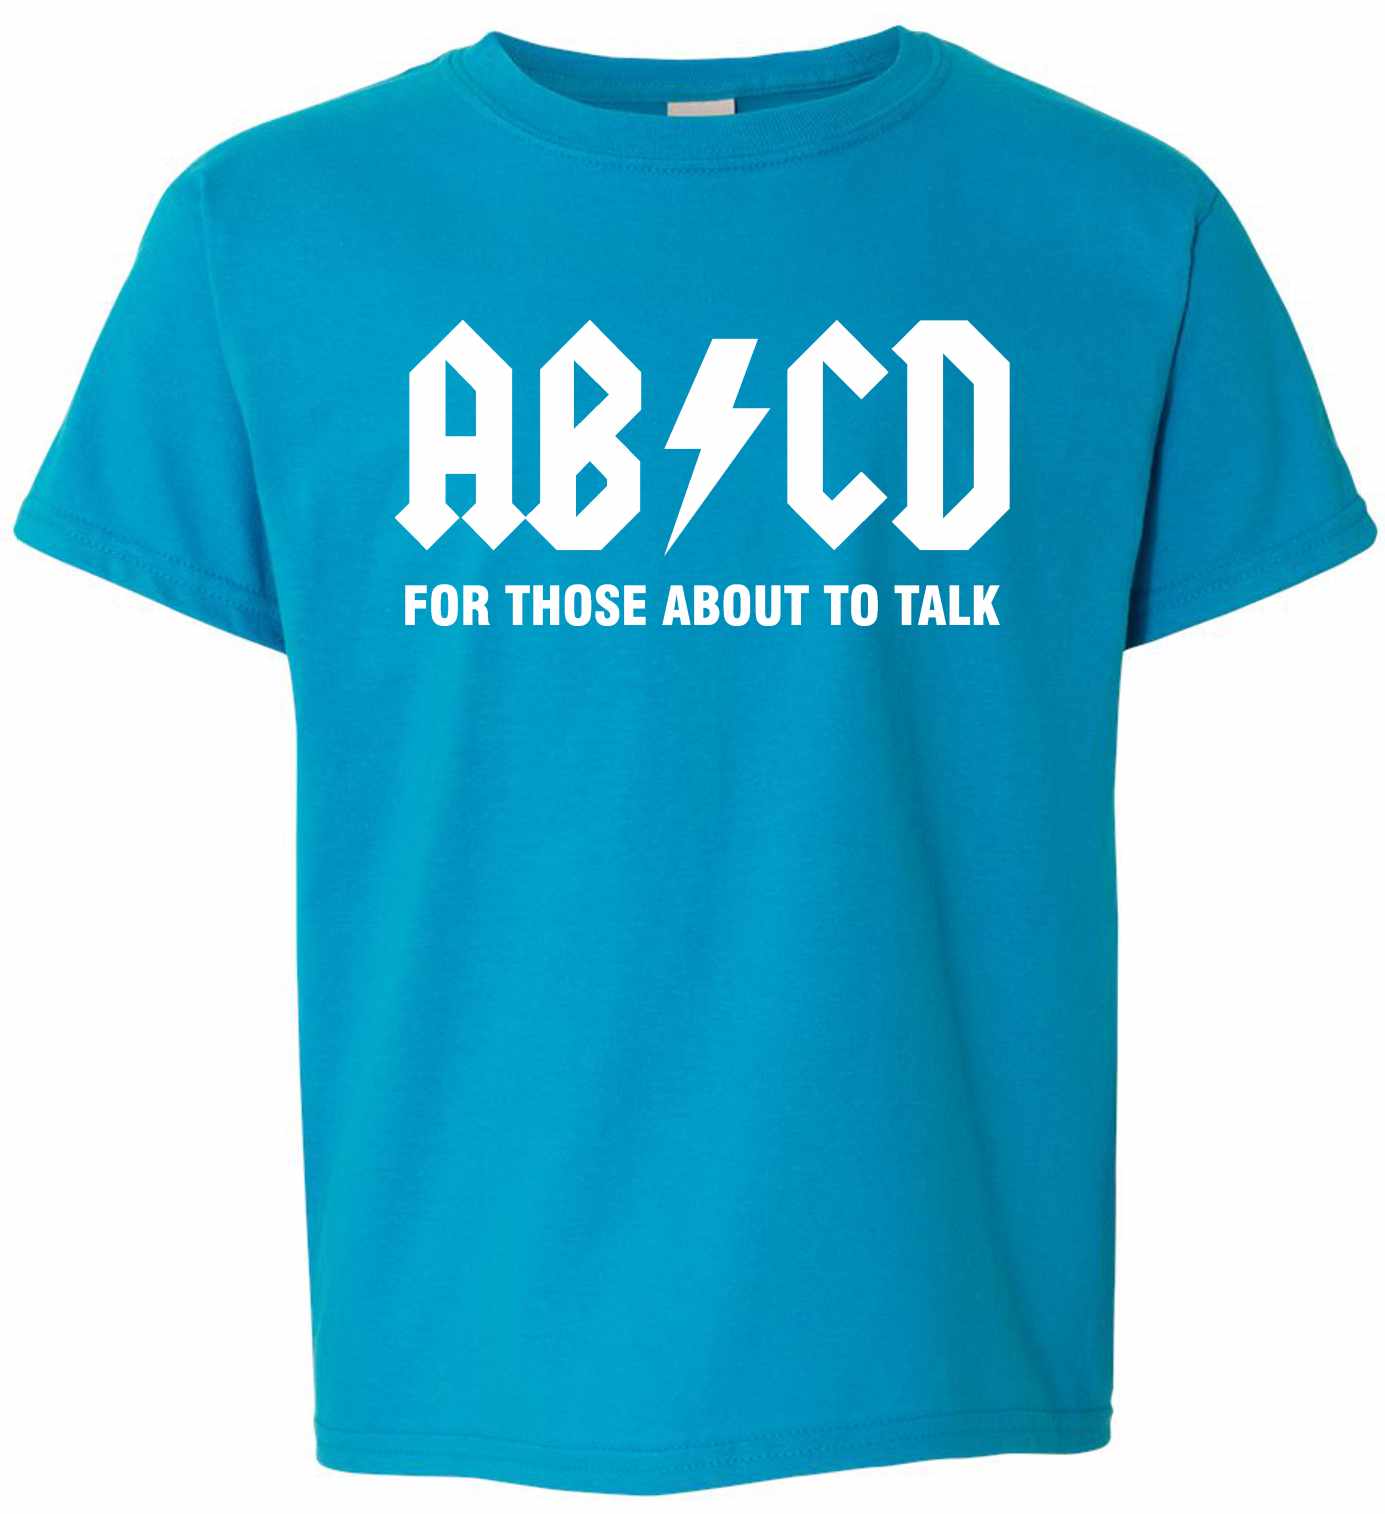 ABCD For Those About To Talk on Youth T-Shirt (#1084-201)